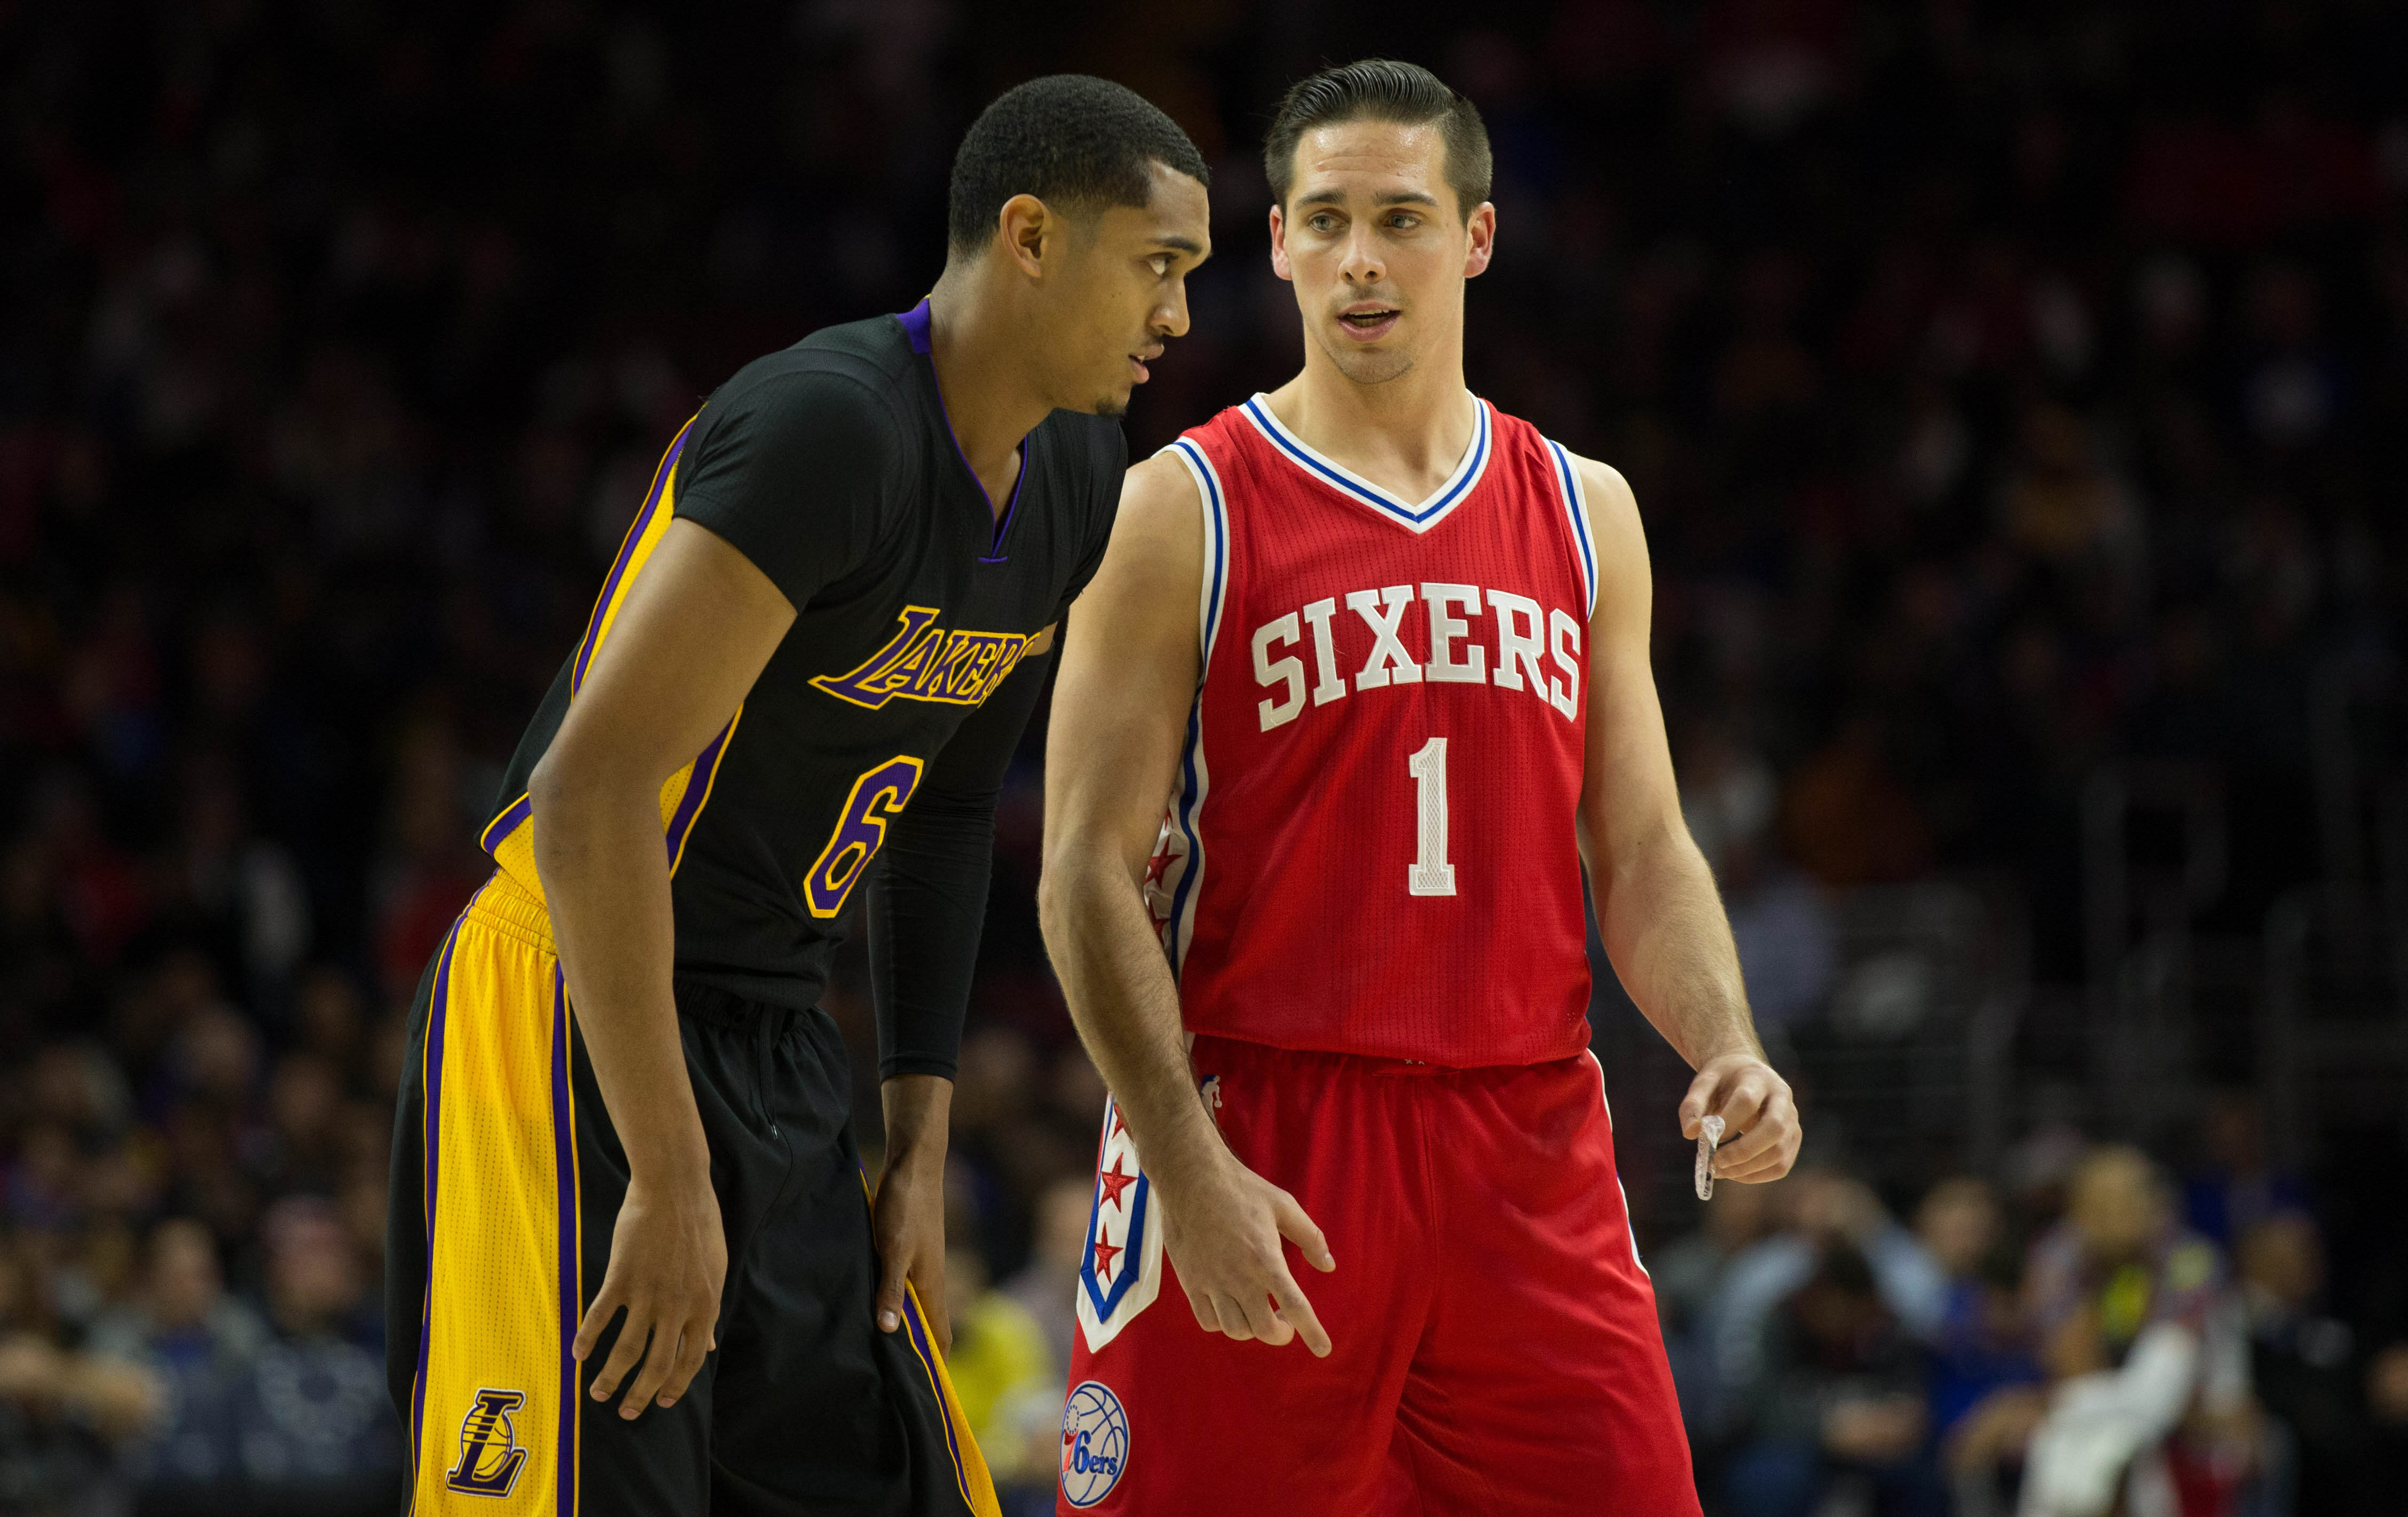 76ers at Lakers live stream: How to watch online